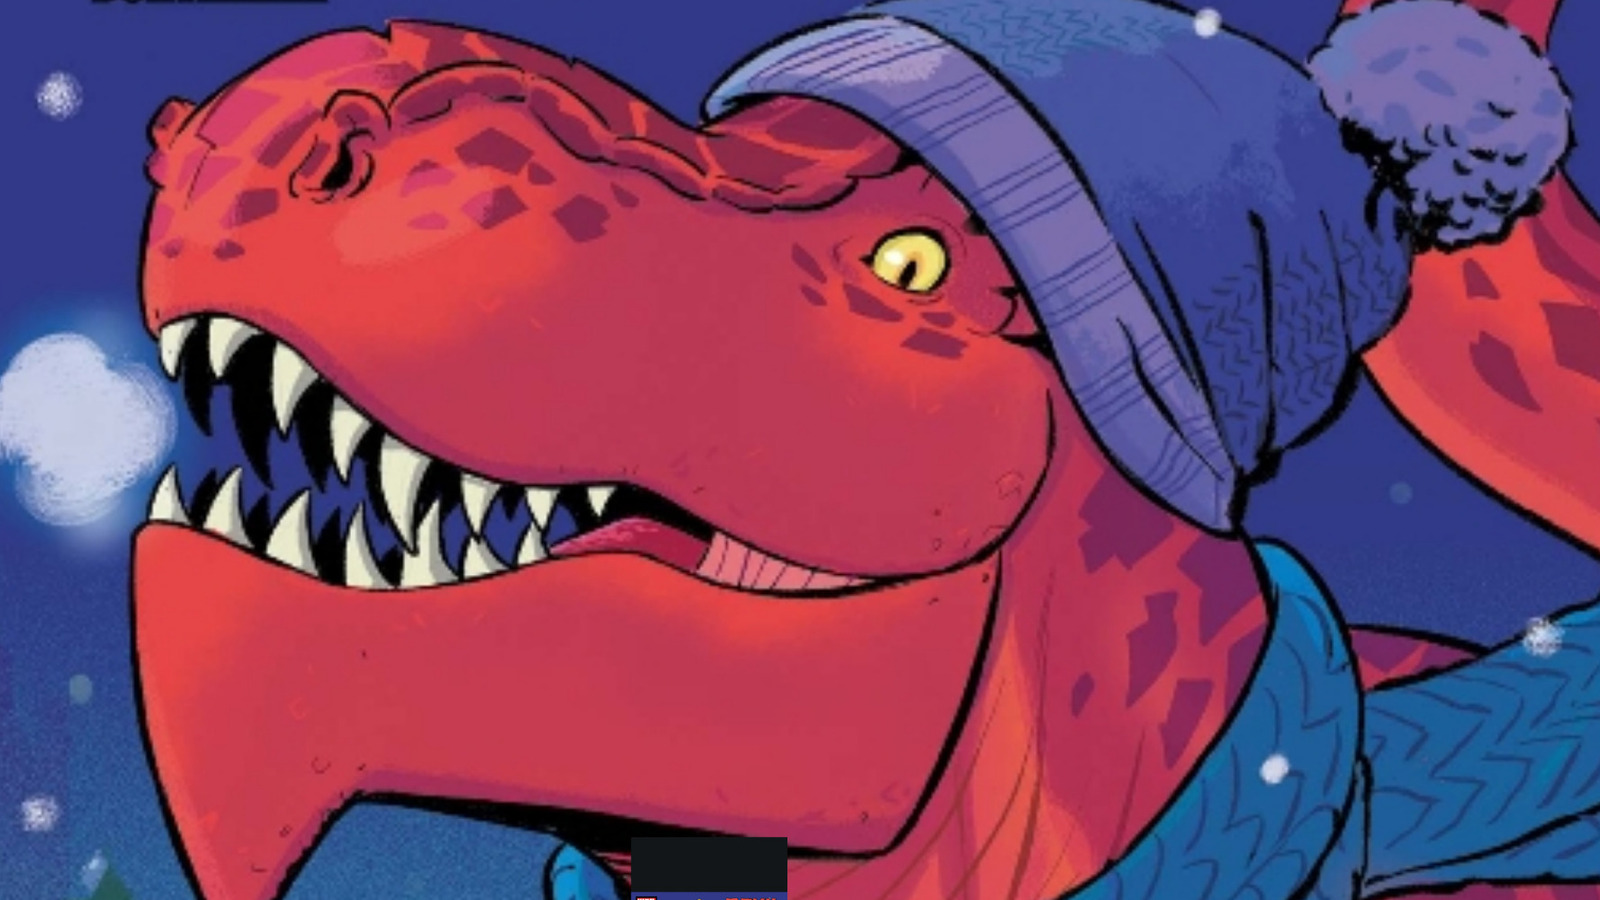 The Avengers Assemble Robot Dinosaurs in New Marvel Project